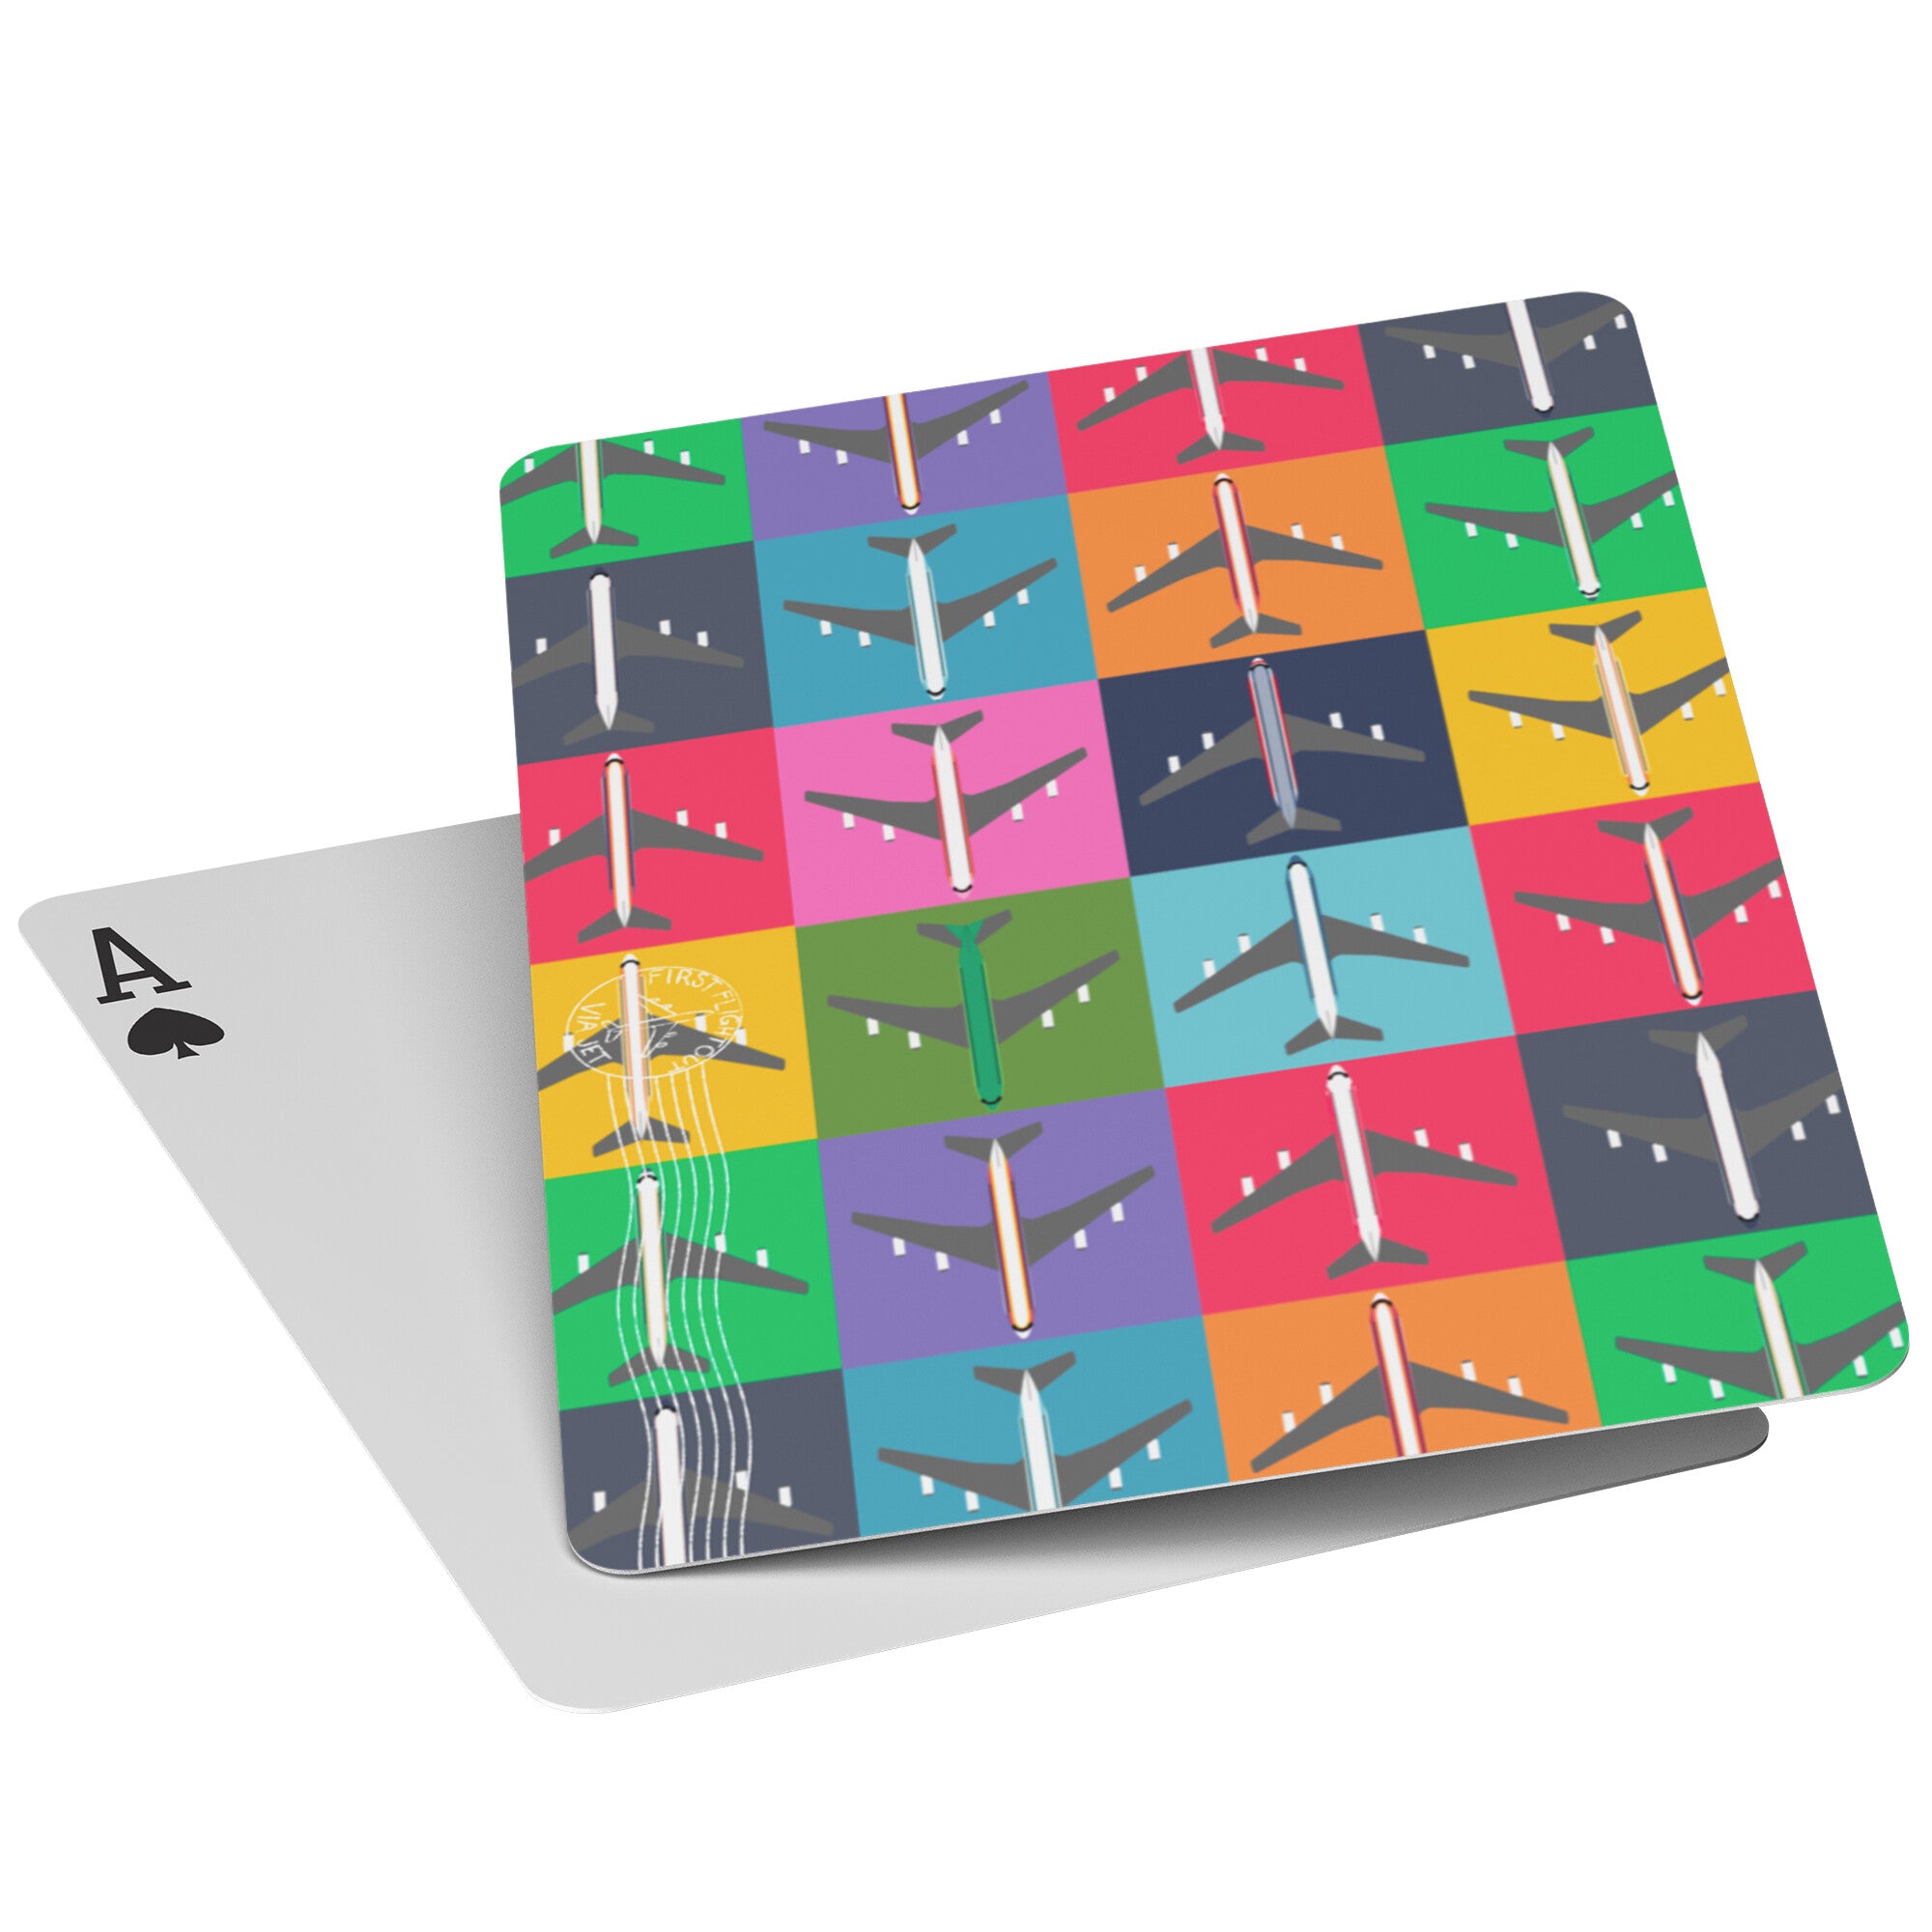 Via Jet Playing Cards